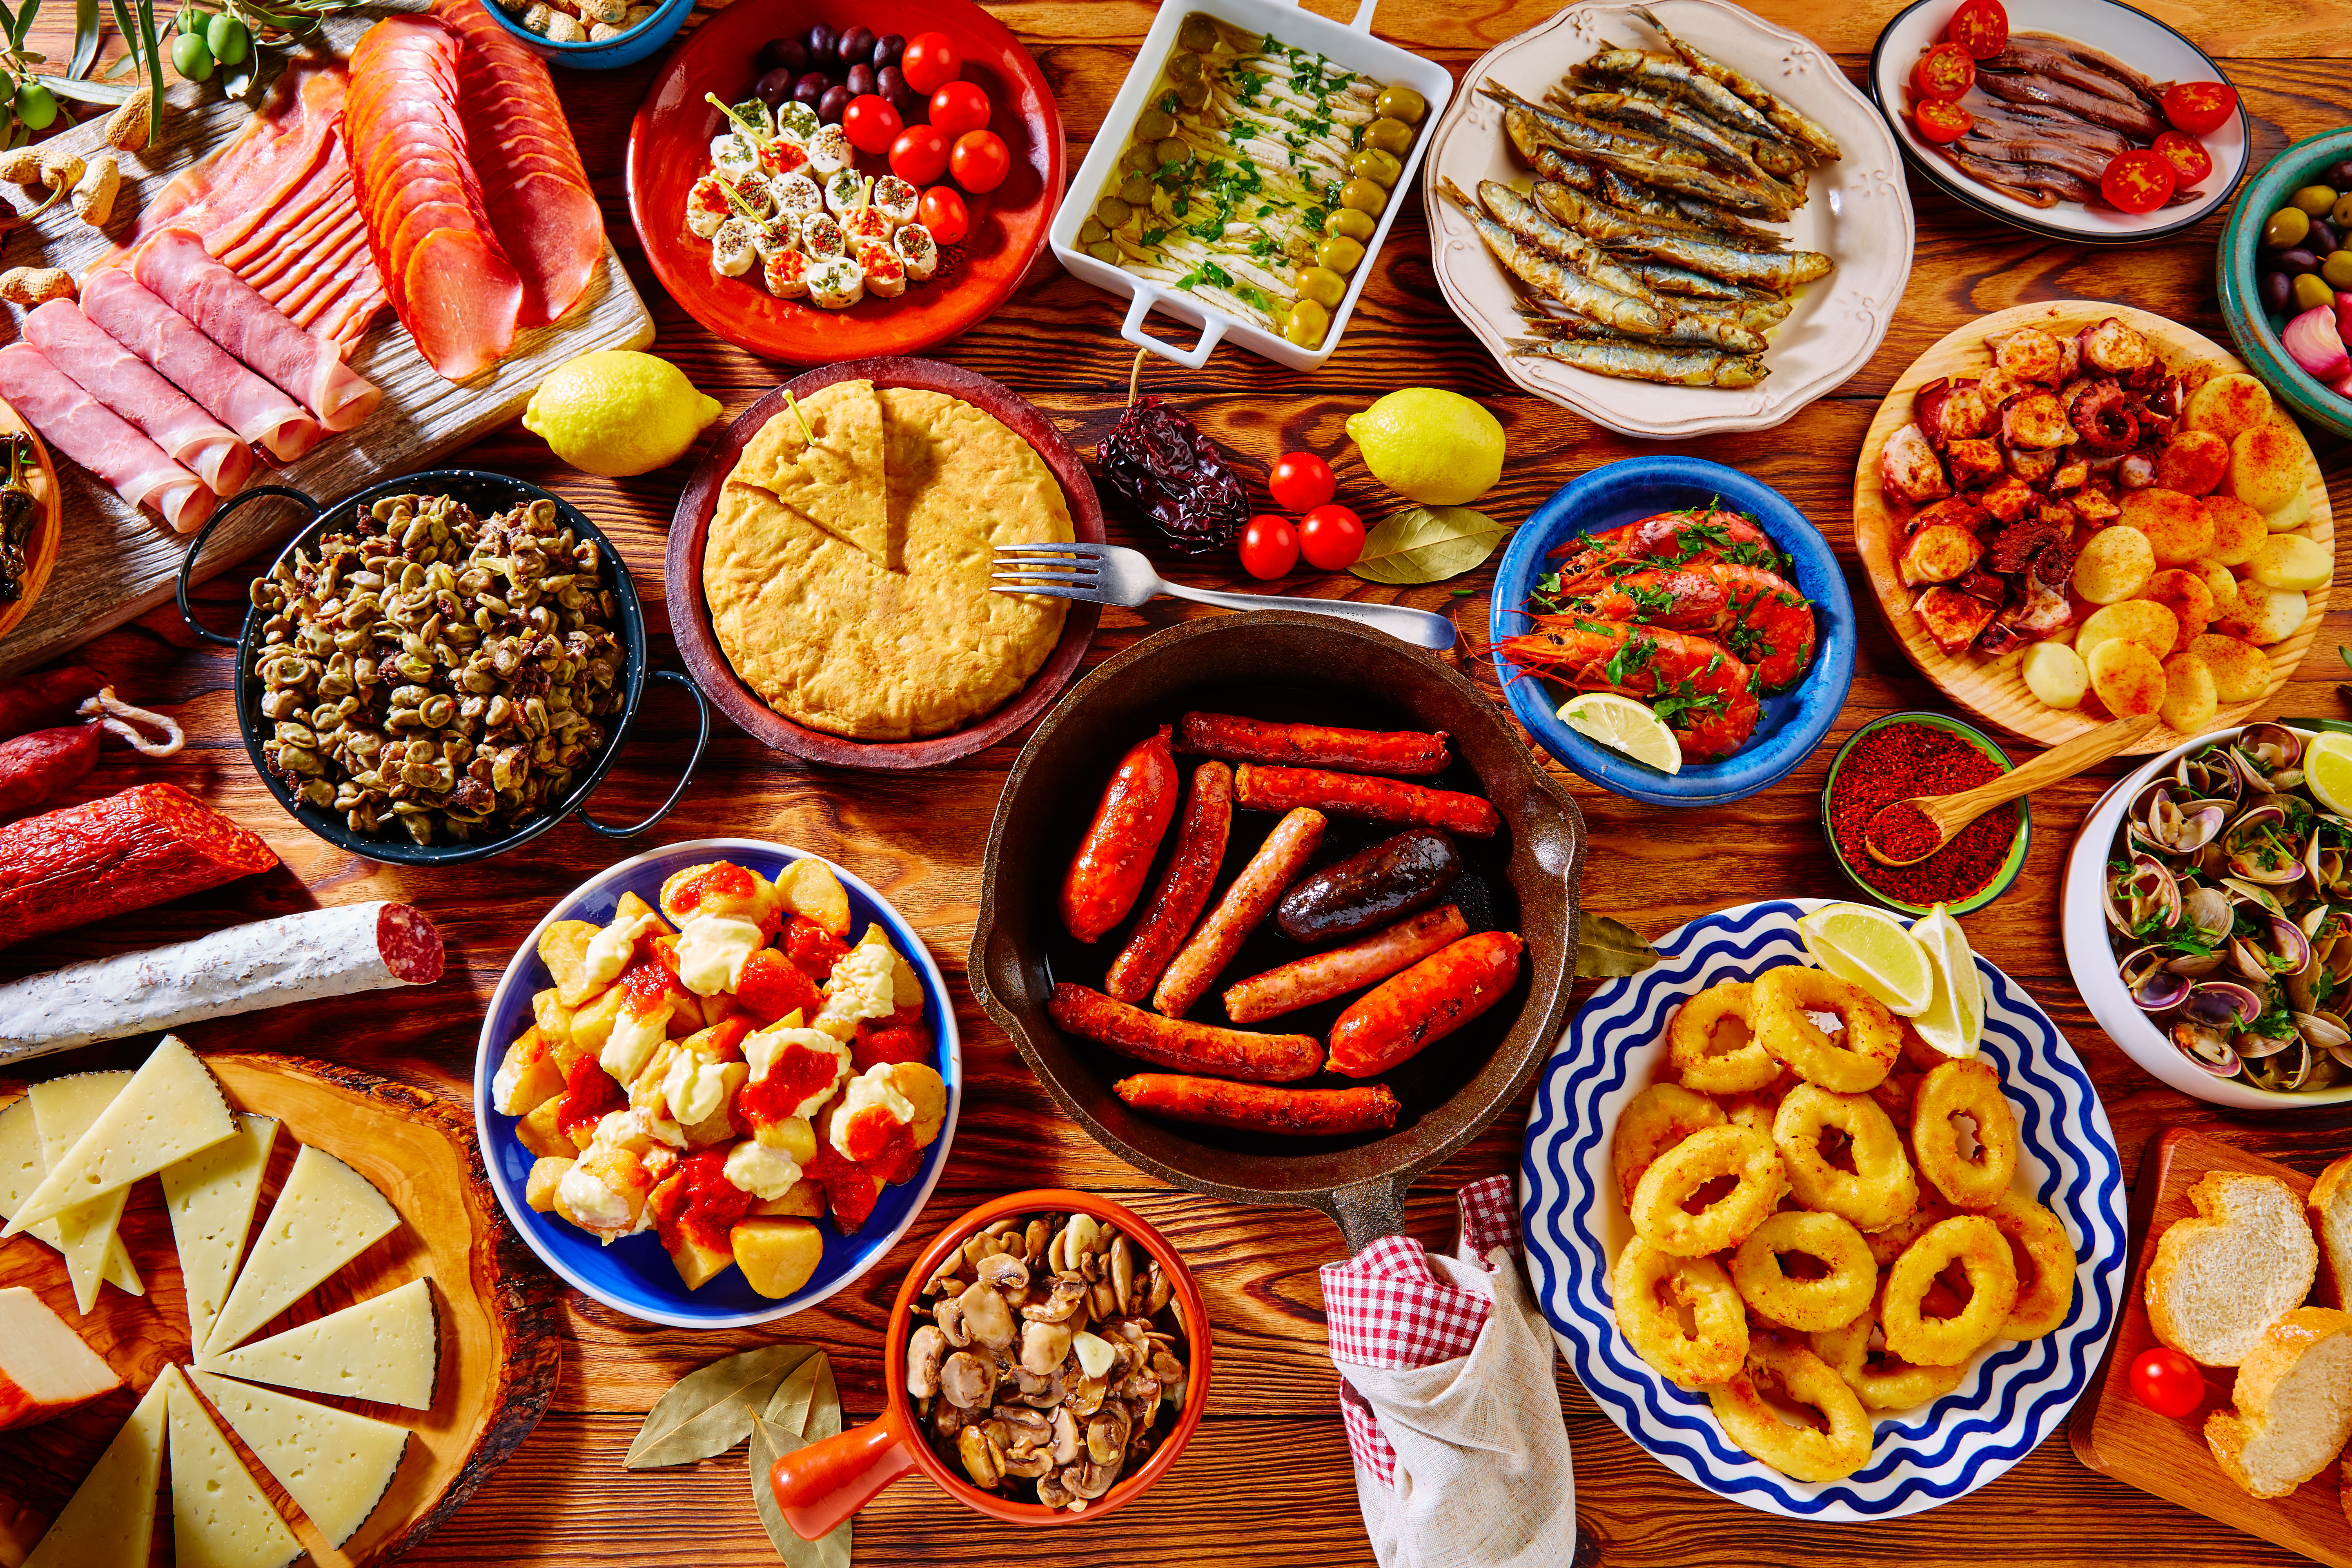 A sampling of traditional Spanish dishes.